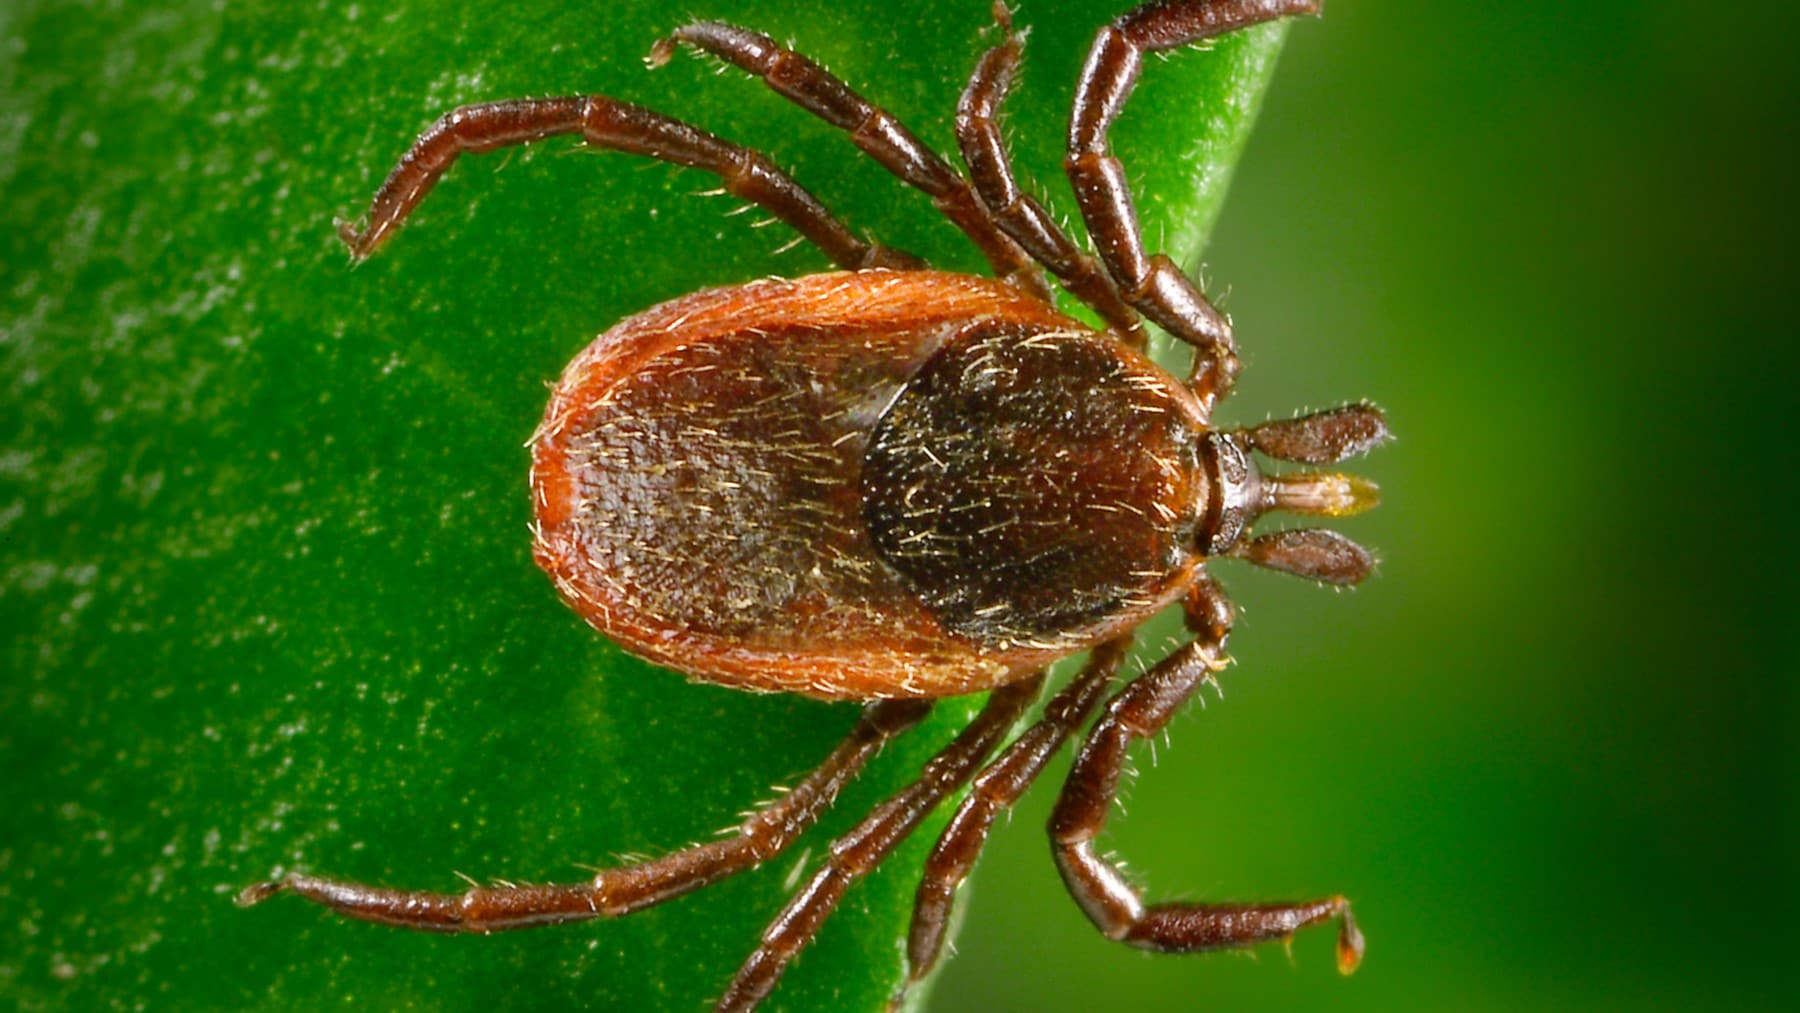 Ixodes pacificus tick on a blade of grass